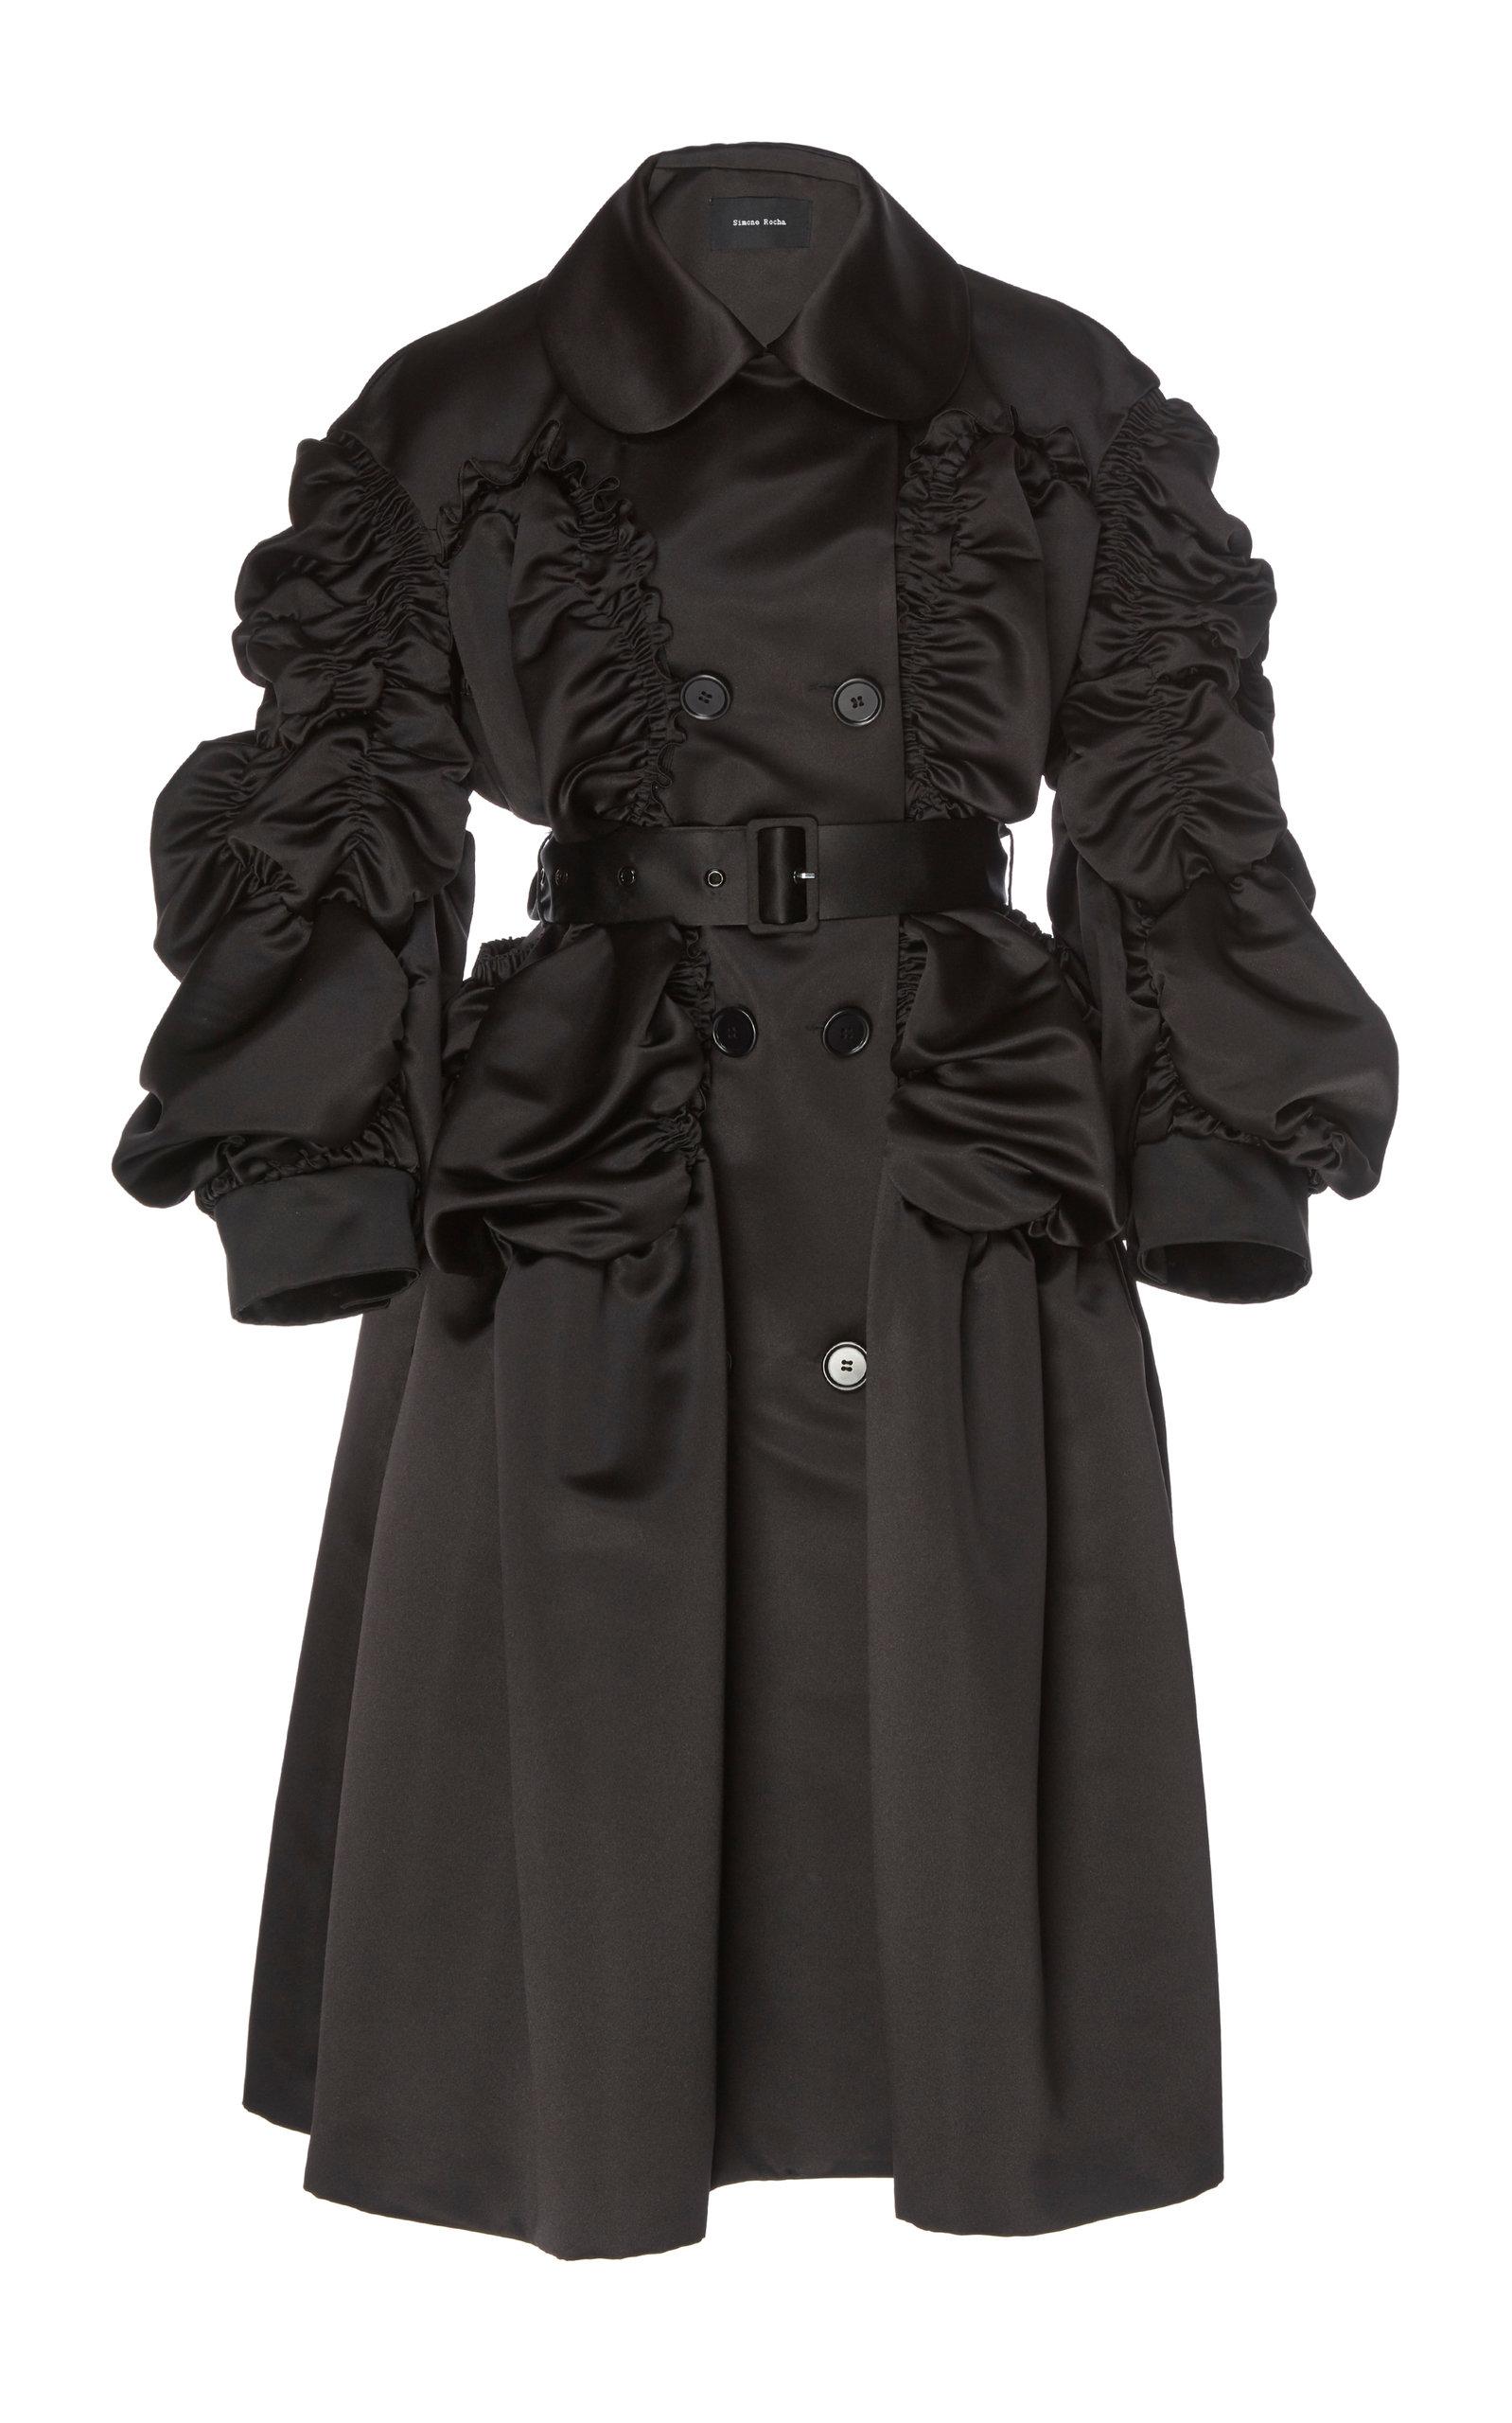 Simone Rocha Belted Ruched Longline Satin Coat in Black - Lyst